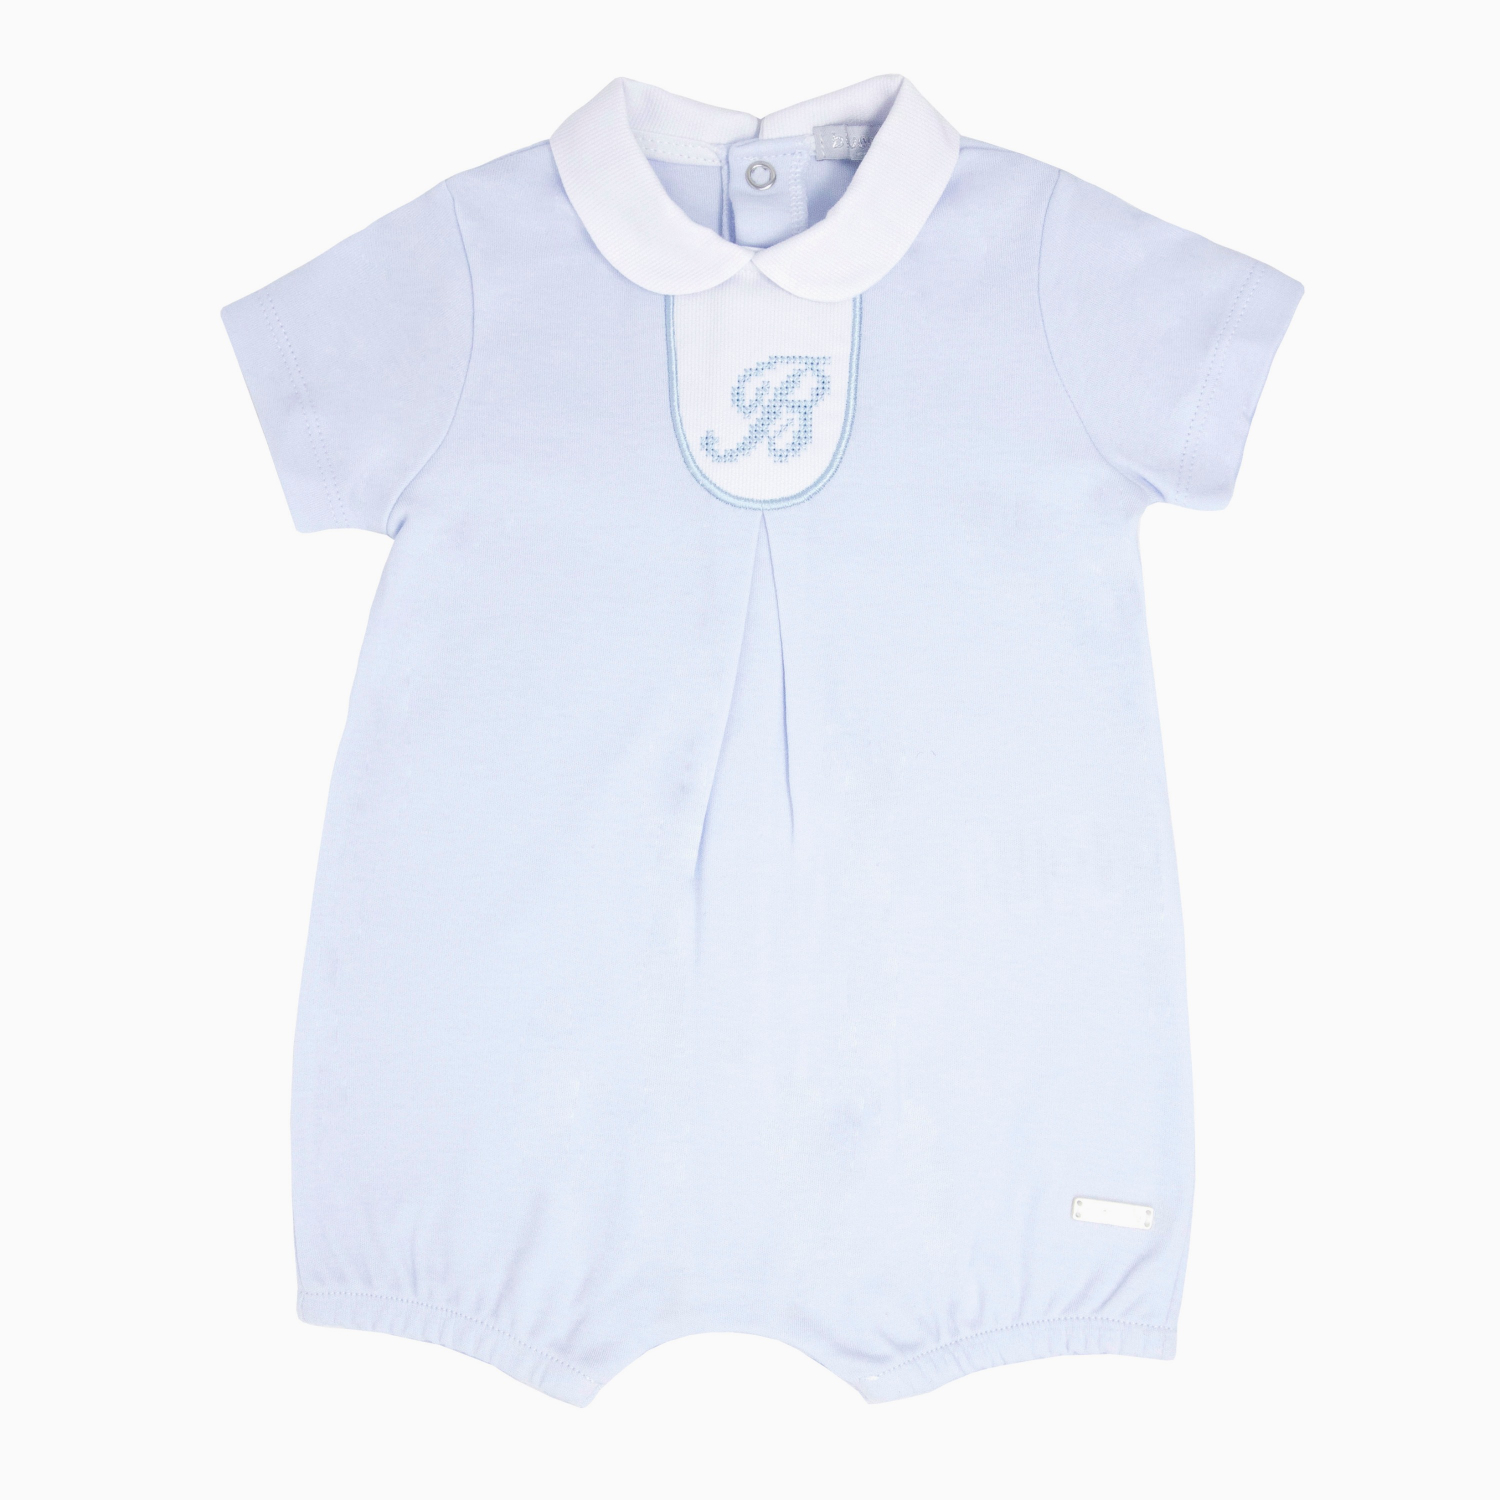 Classic Chic summer Baby Boy outfit 